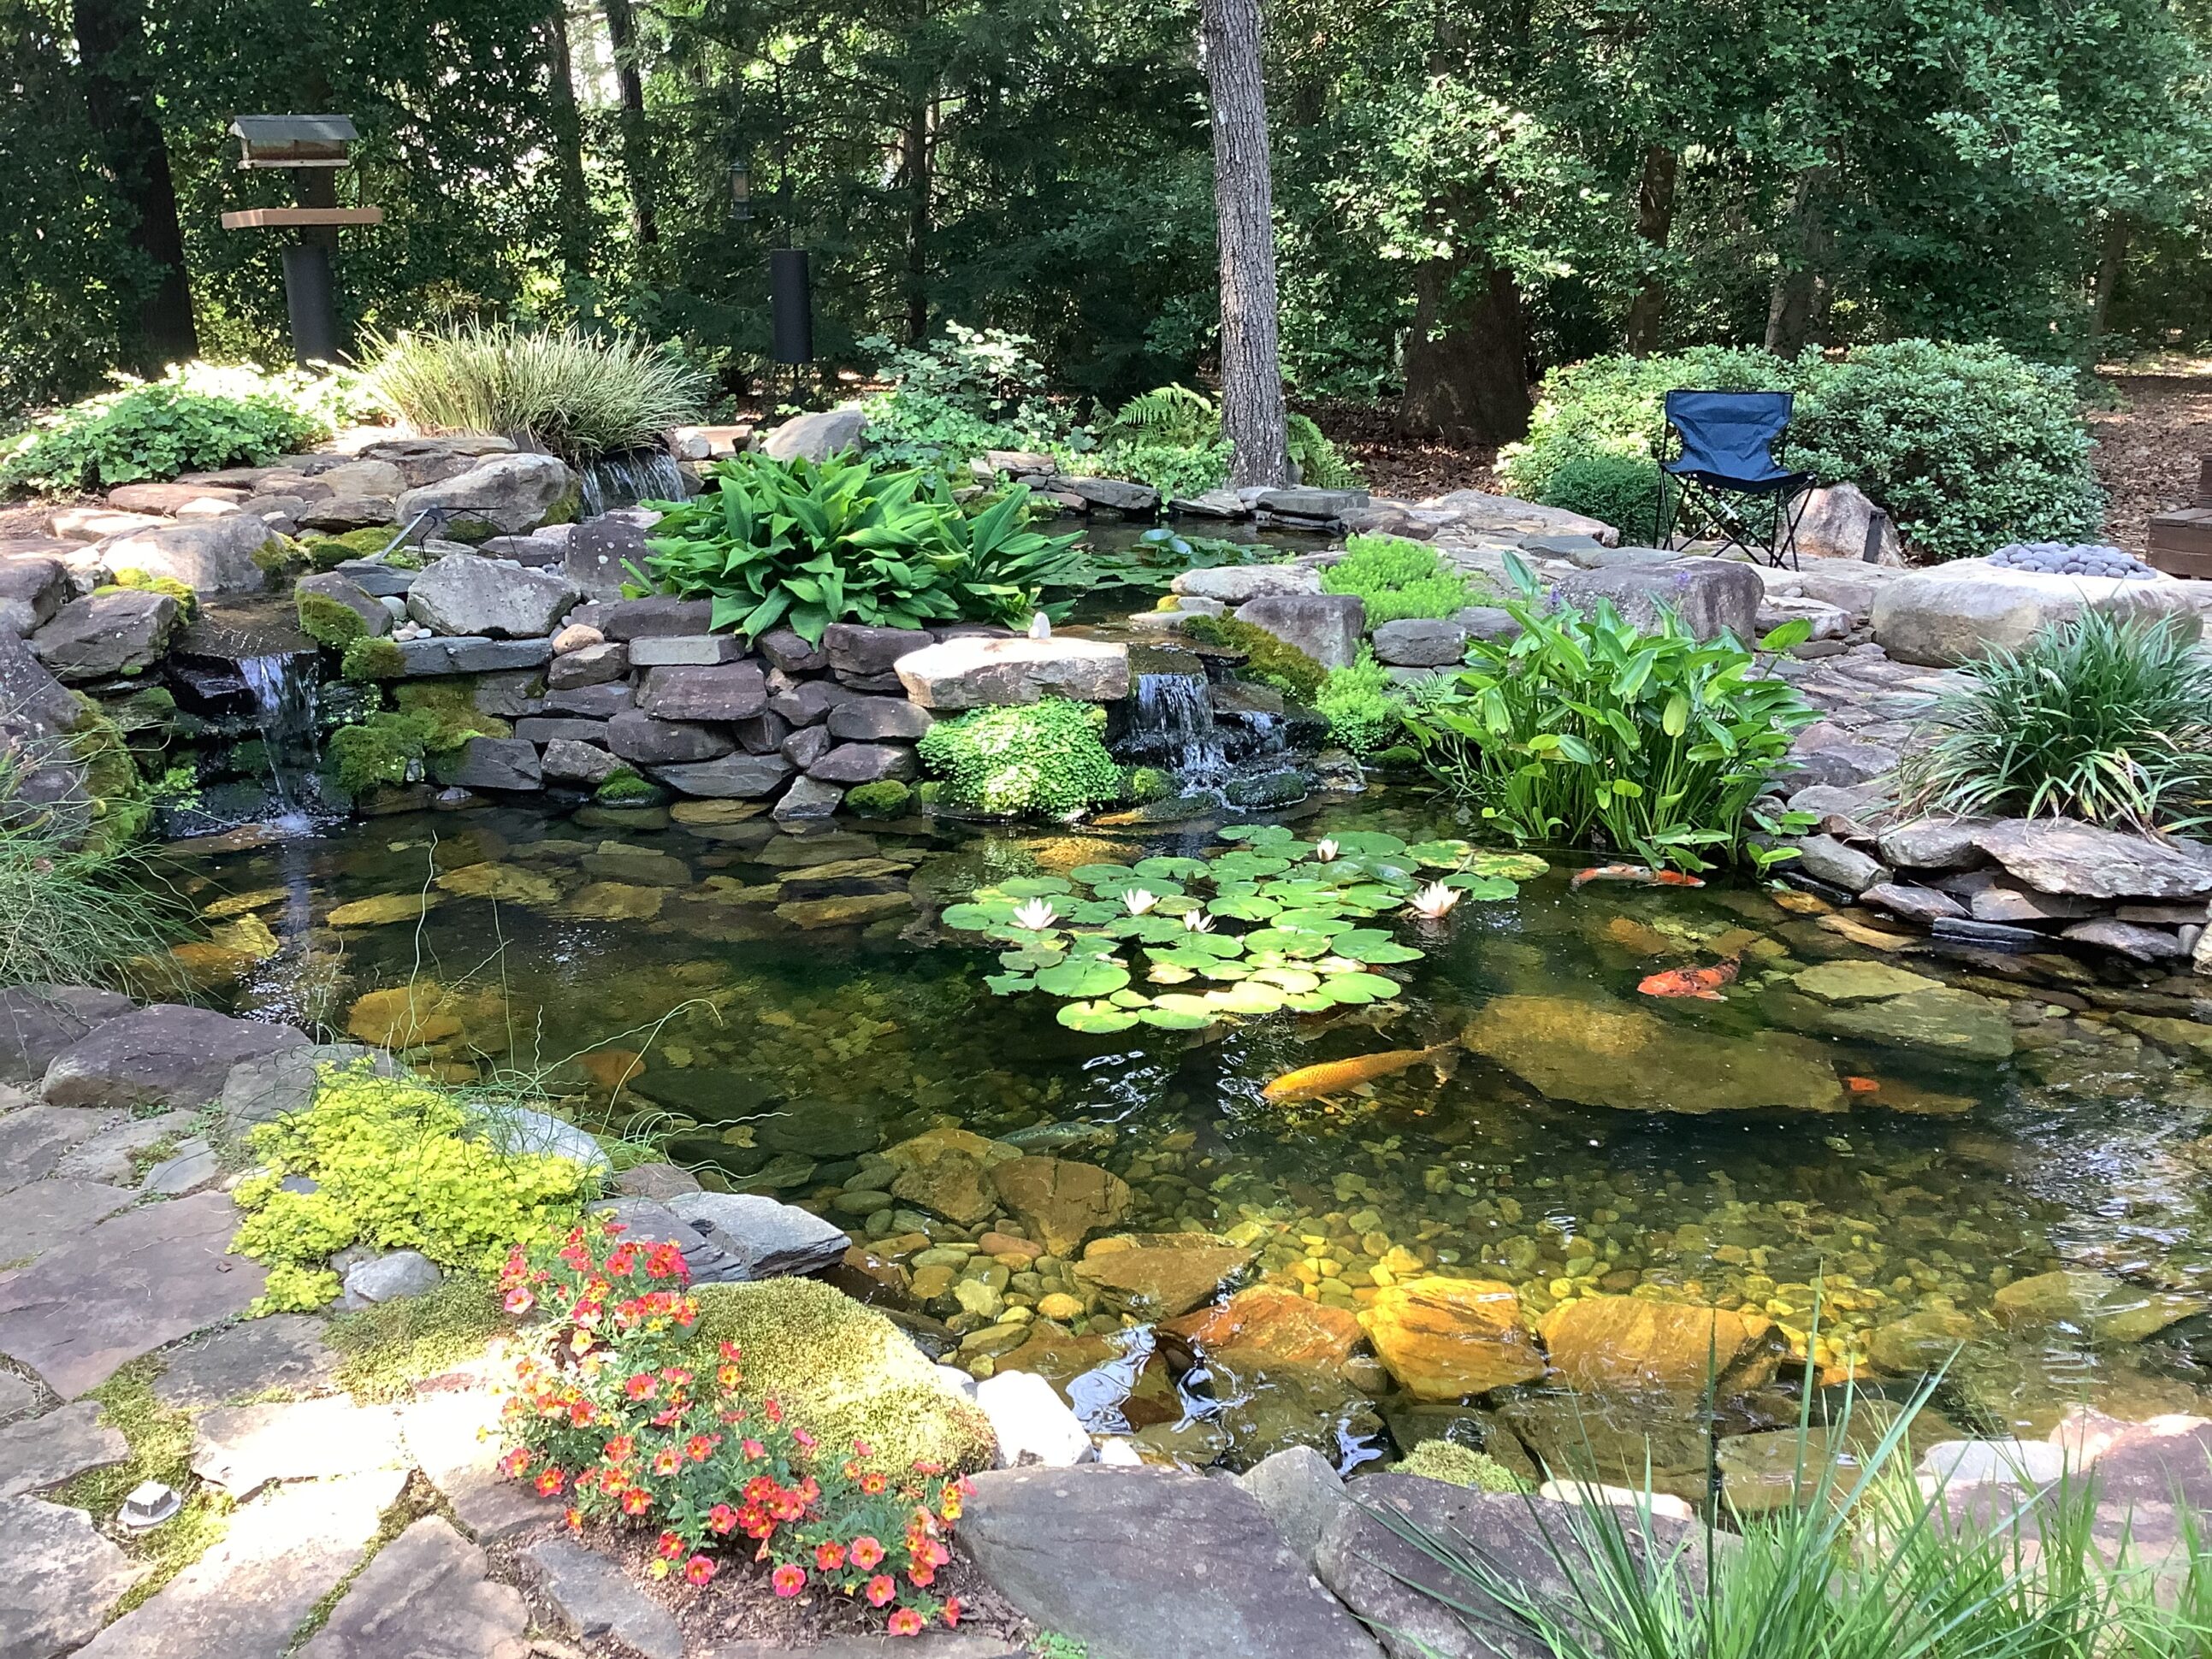 A pond with water lilies and rocks in the middle of it.